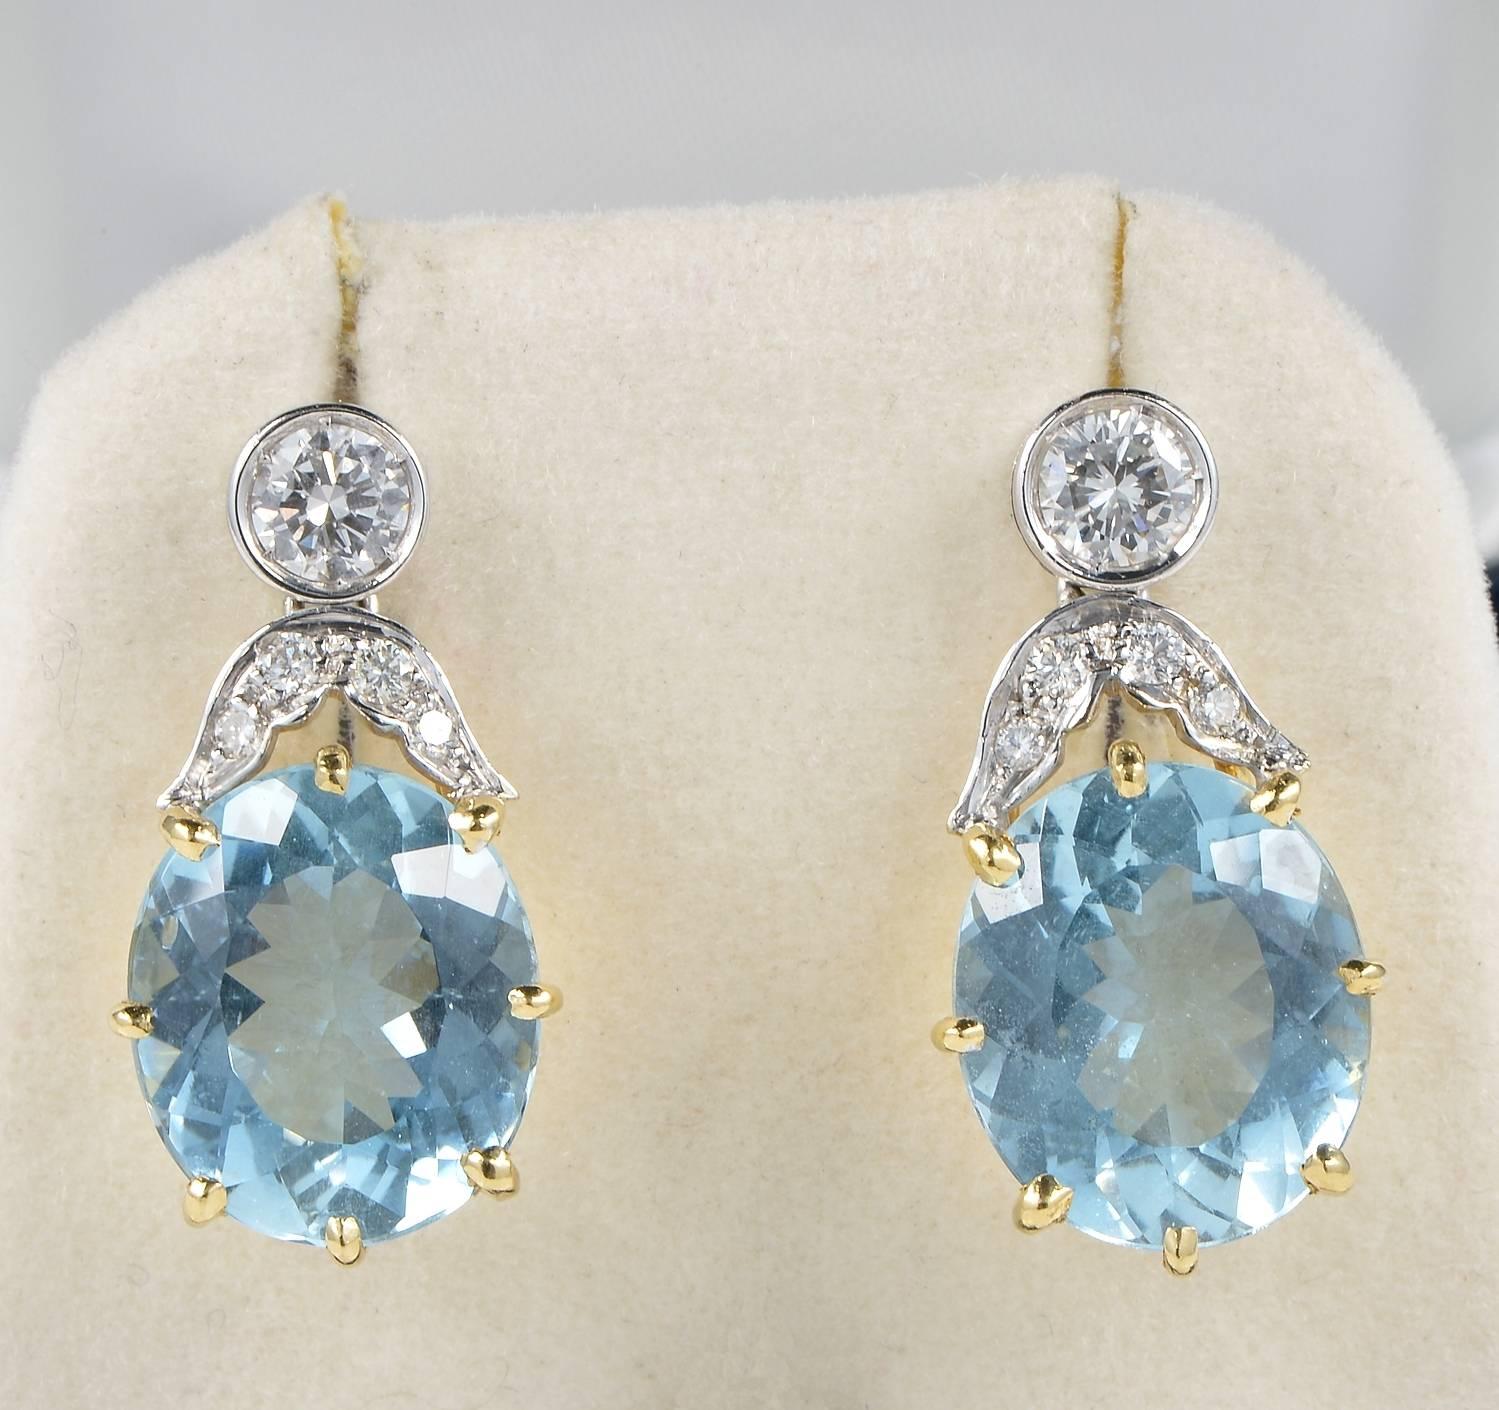 Superb pair of late Art Deco drop earrings.
Designed with a large oval drop of Natural Aquamarine of pleasing sky blue colour complemented by leaf work and a target Diamond set on top.
Hand crafted of solid 18 KT gold except the Diamond set of